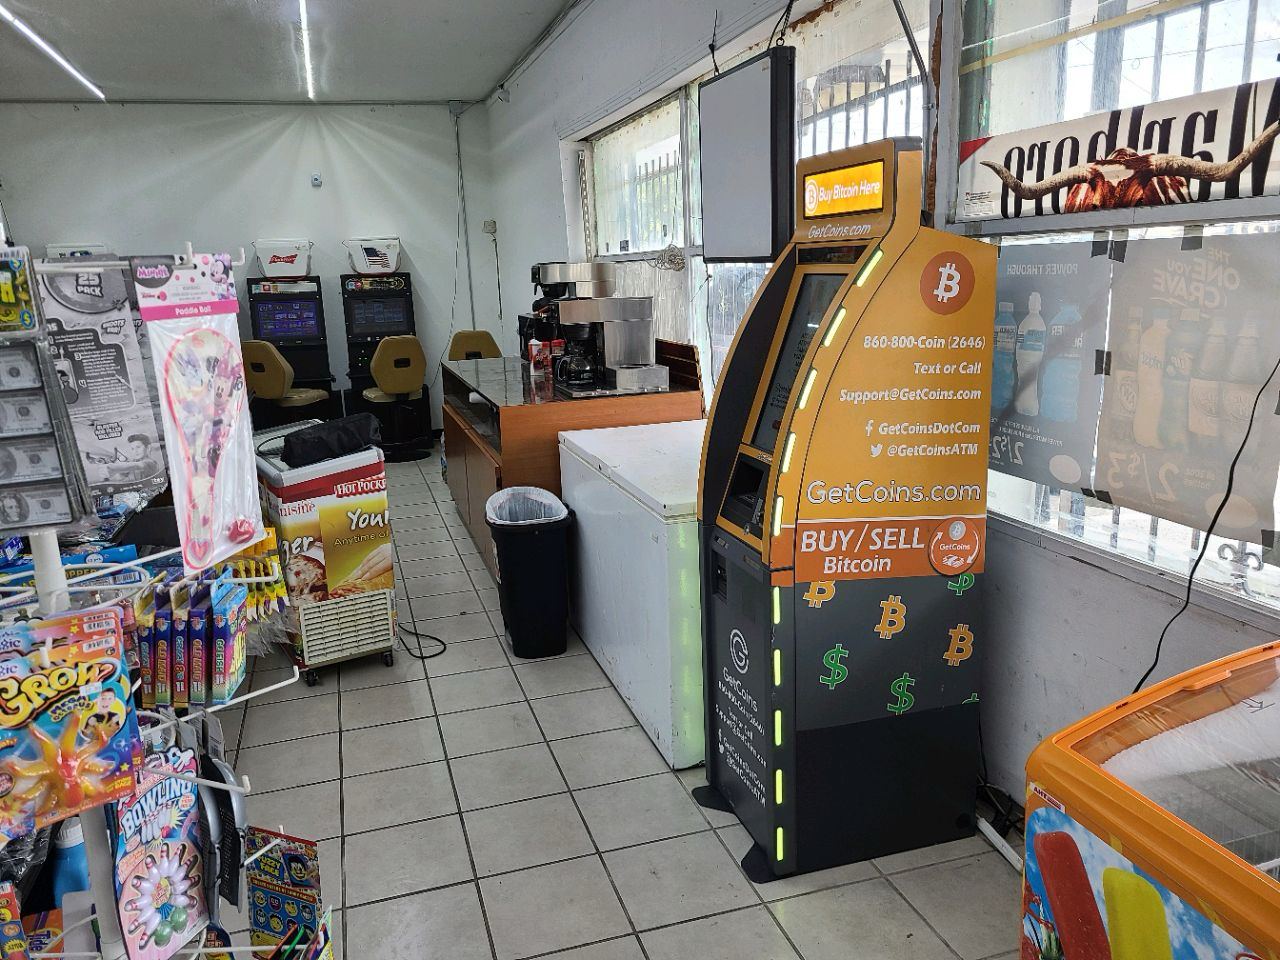 Getcoins - Bitcoin ATM - Inside of Wayside Food Mart in Houston, Texas